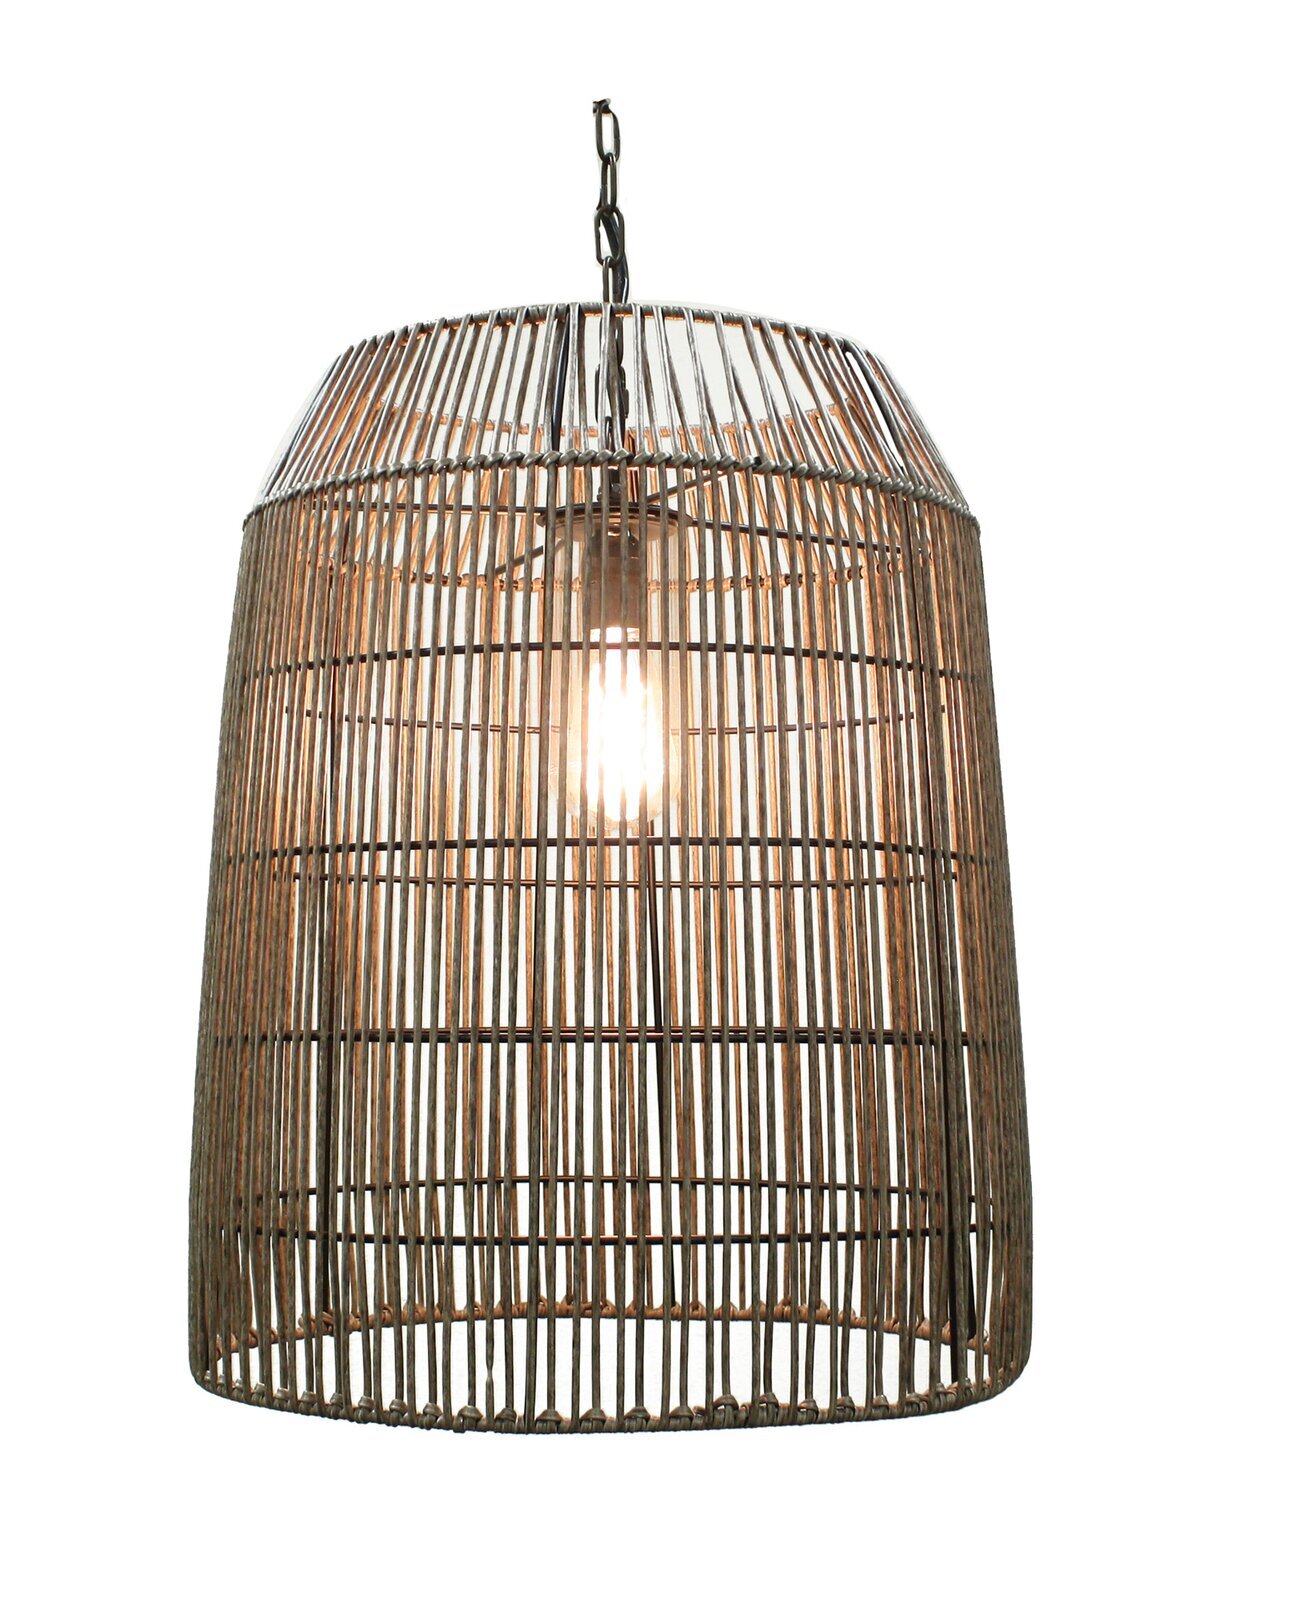 Extra large outdoor hanging lantern in a wicker design